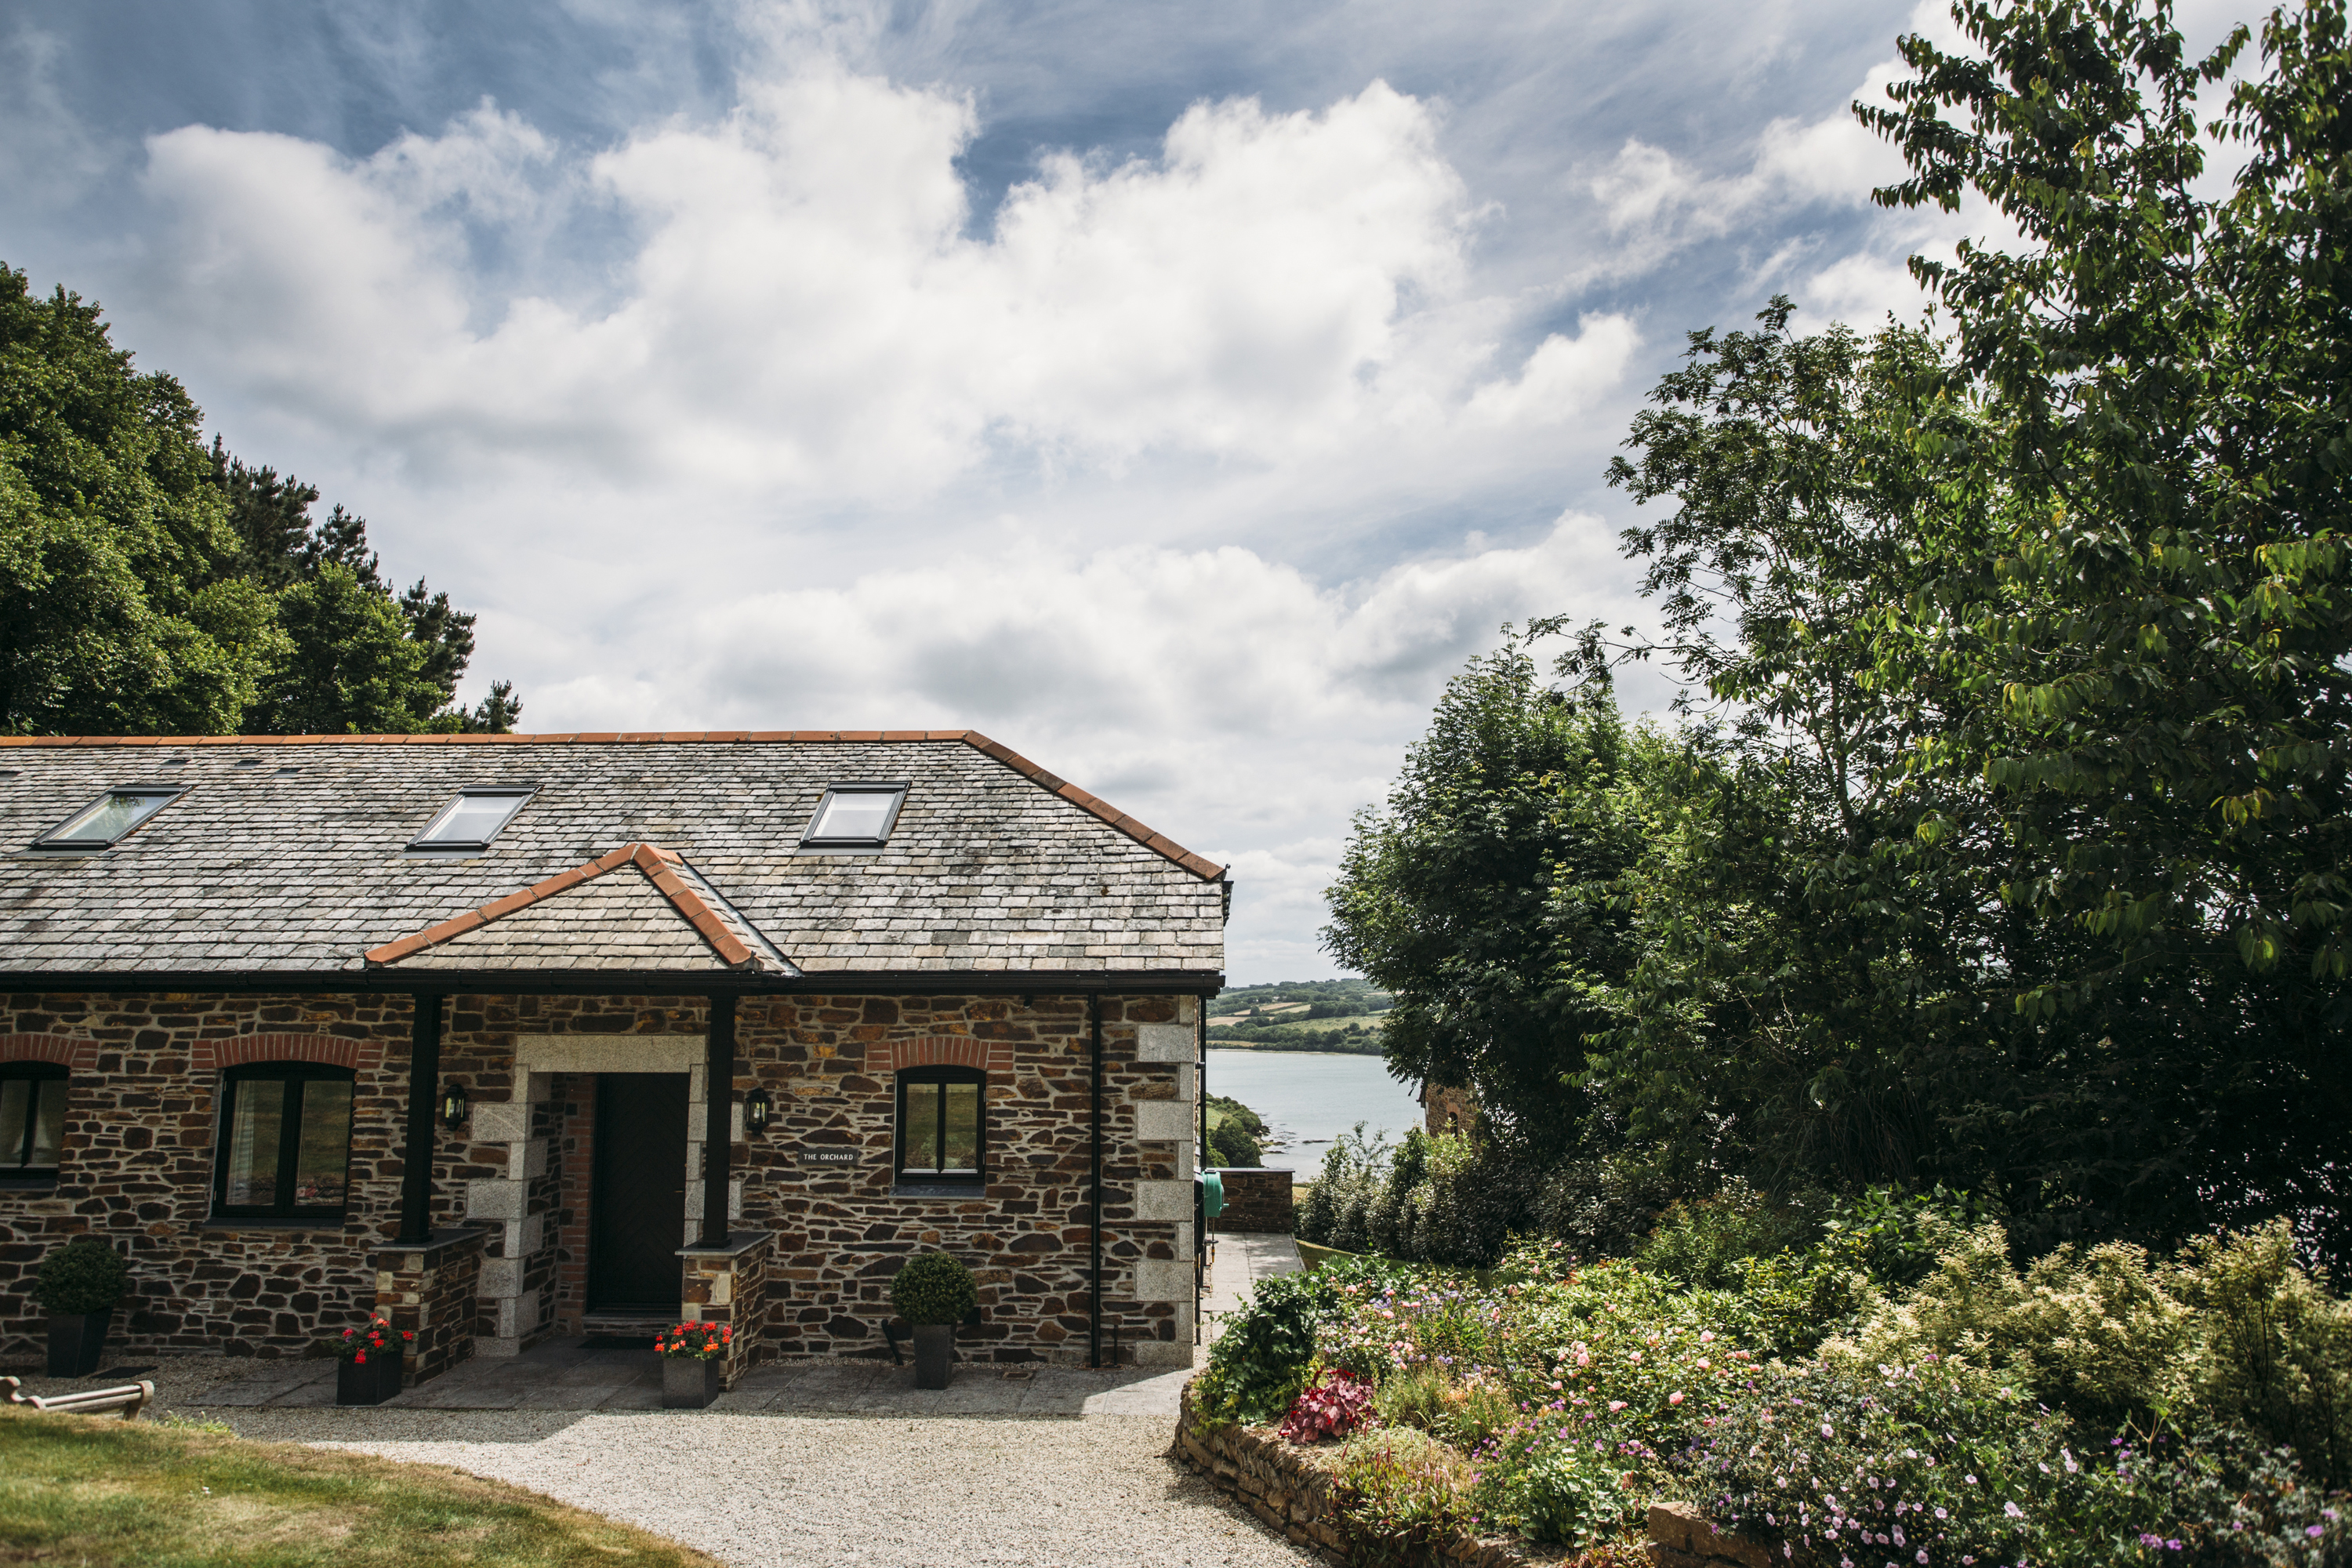 Exterior of The Orchard, a self-catering holiday property in Rock, North Cornwall